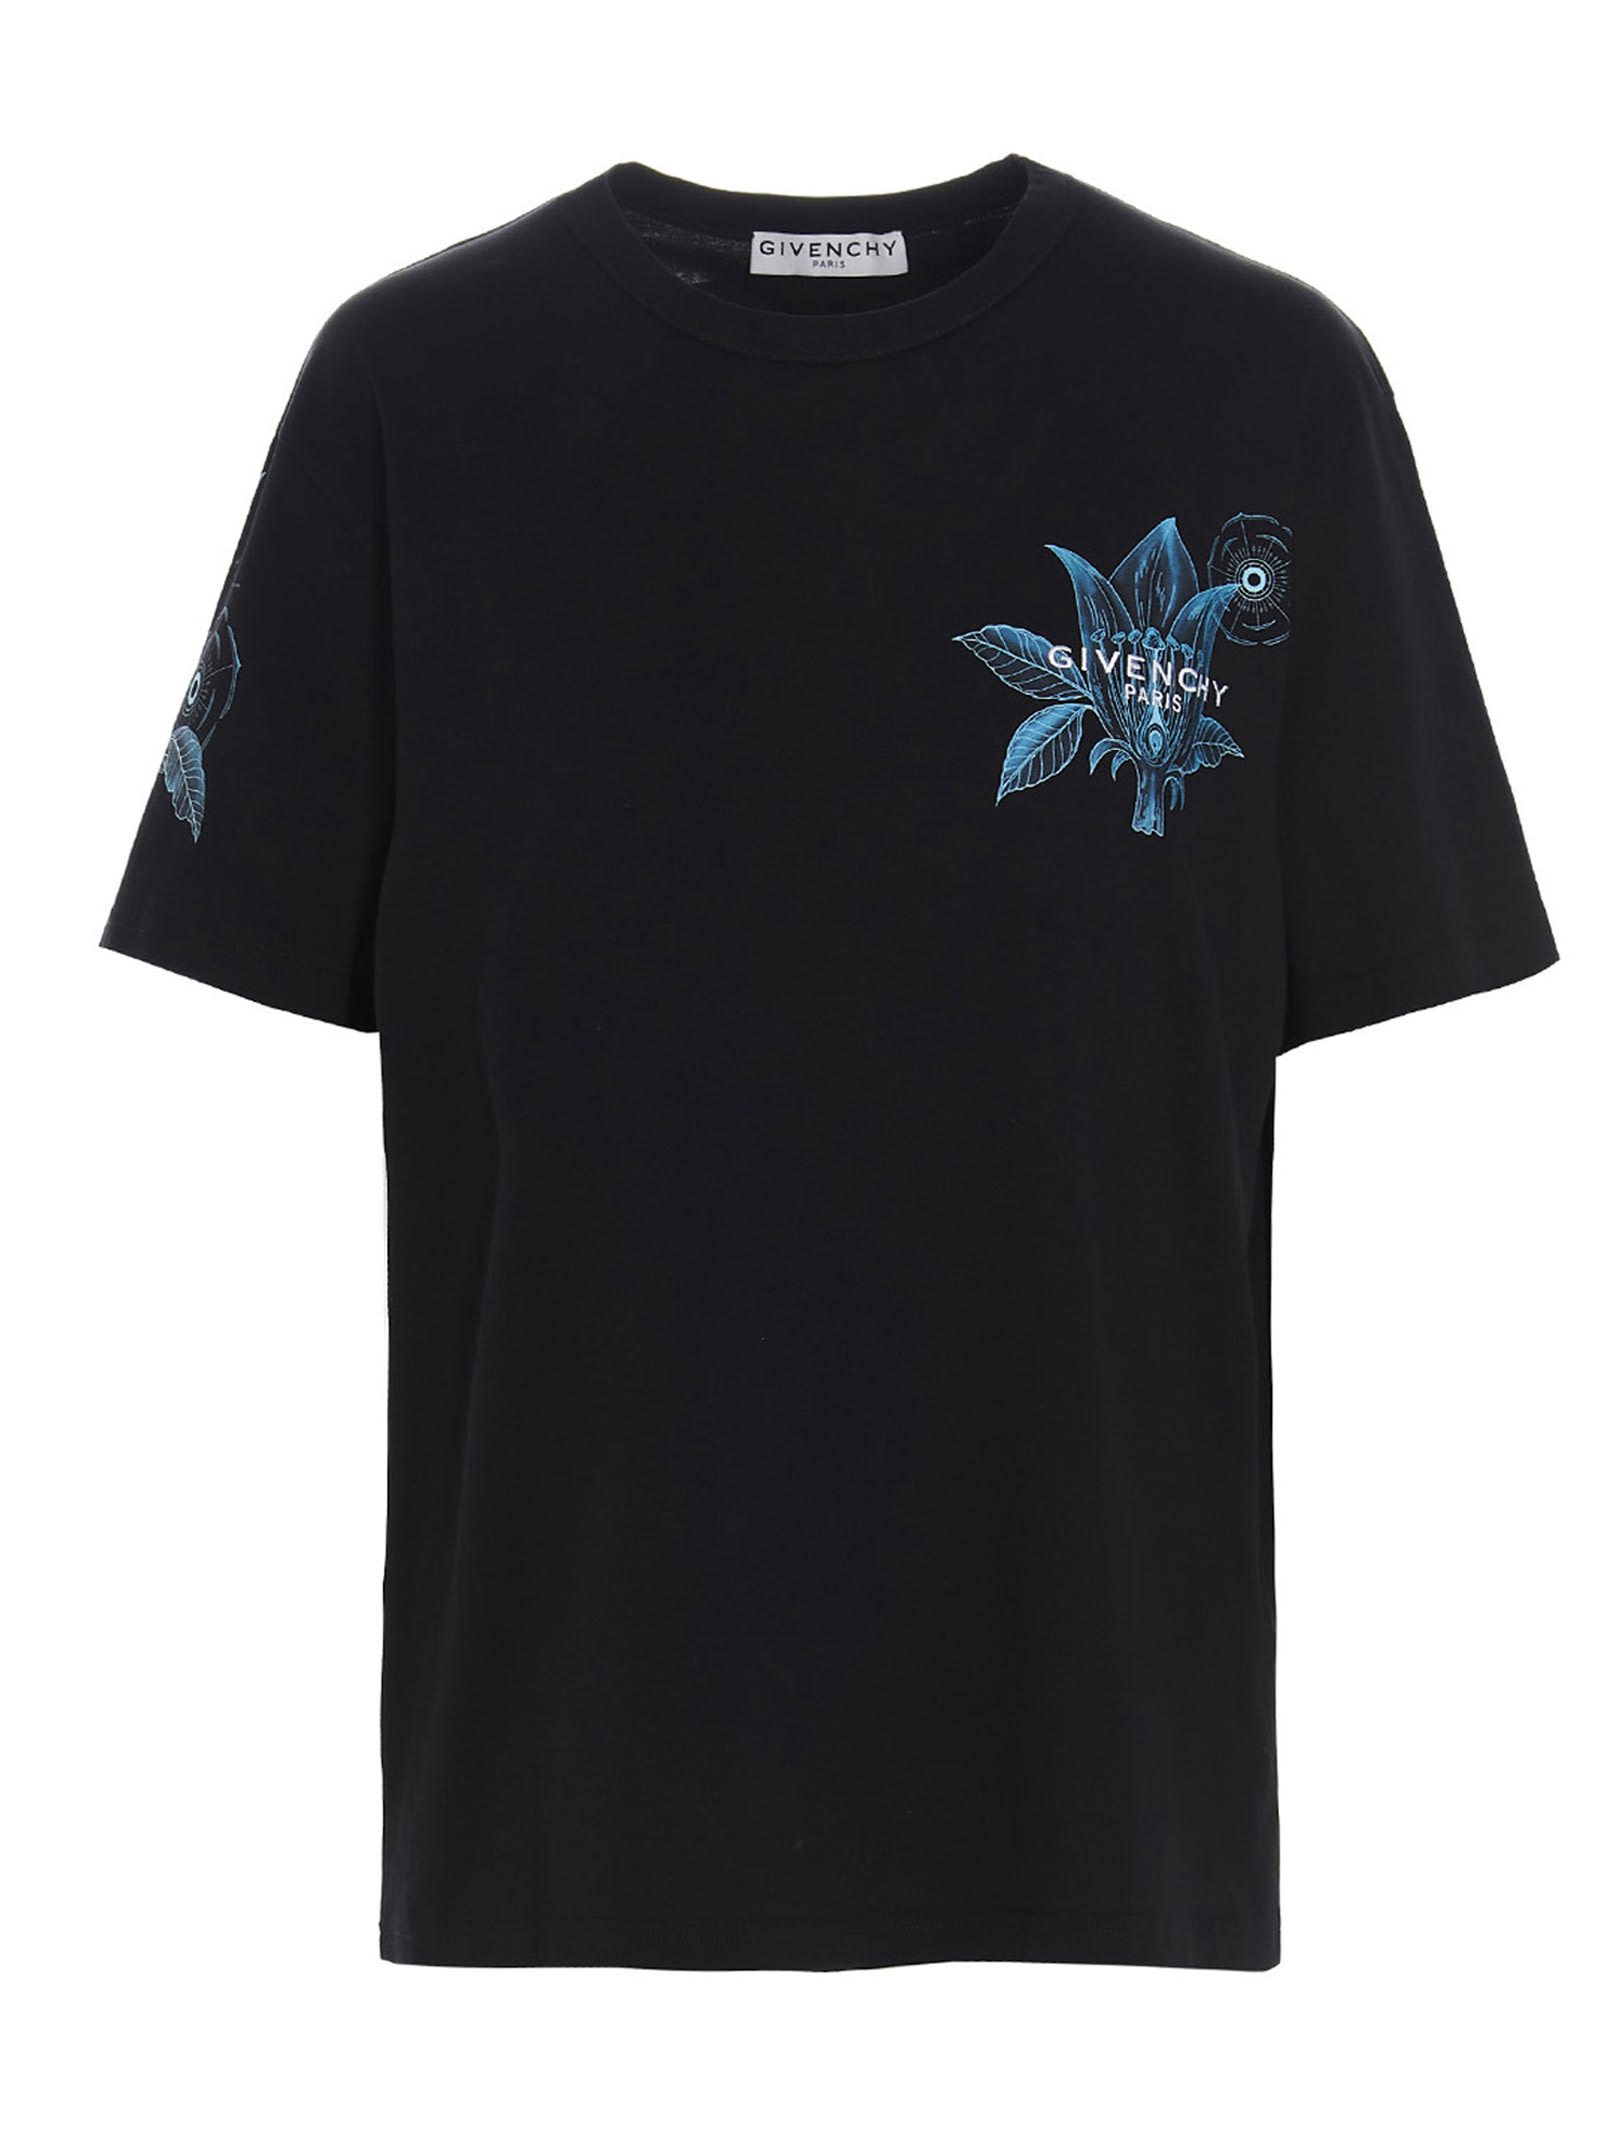 Givenchy floral Schematic Print T-shirt